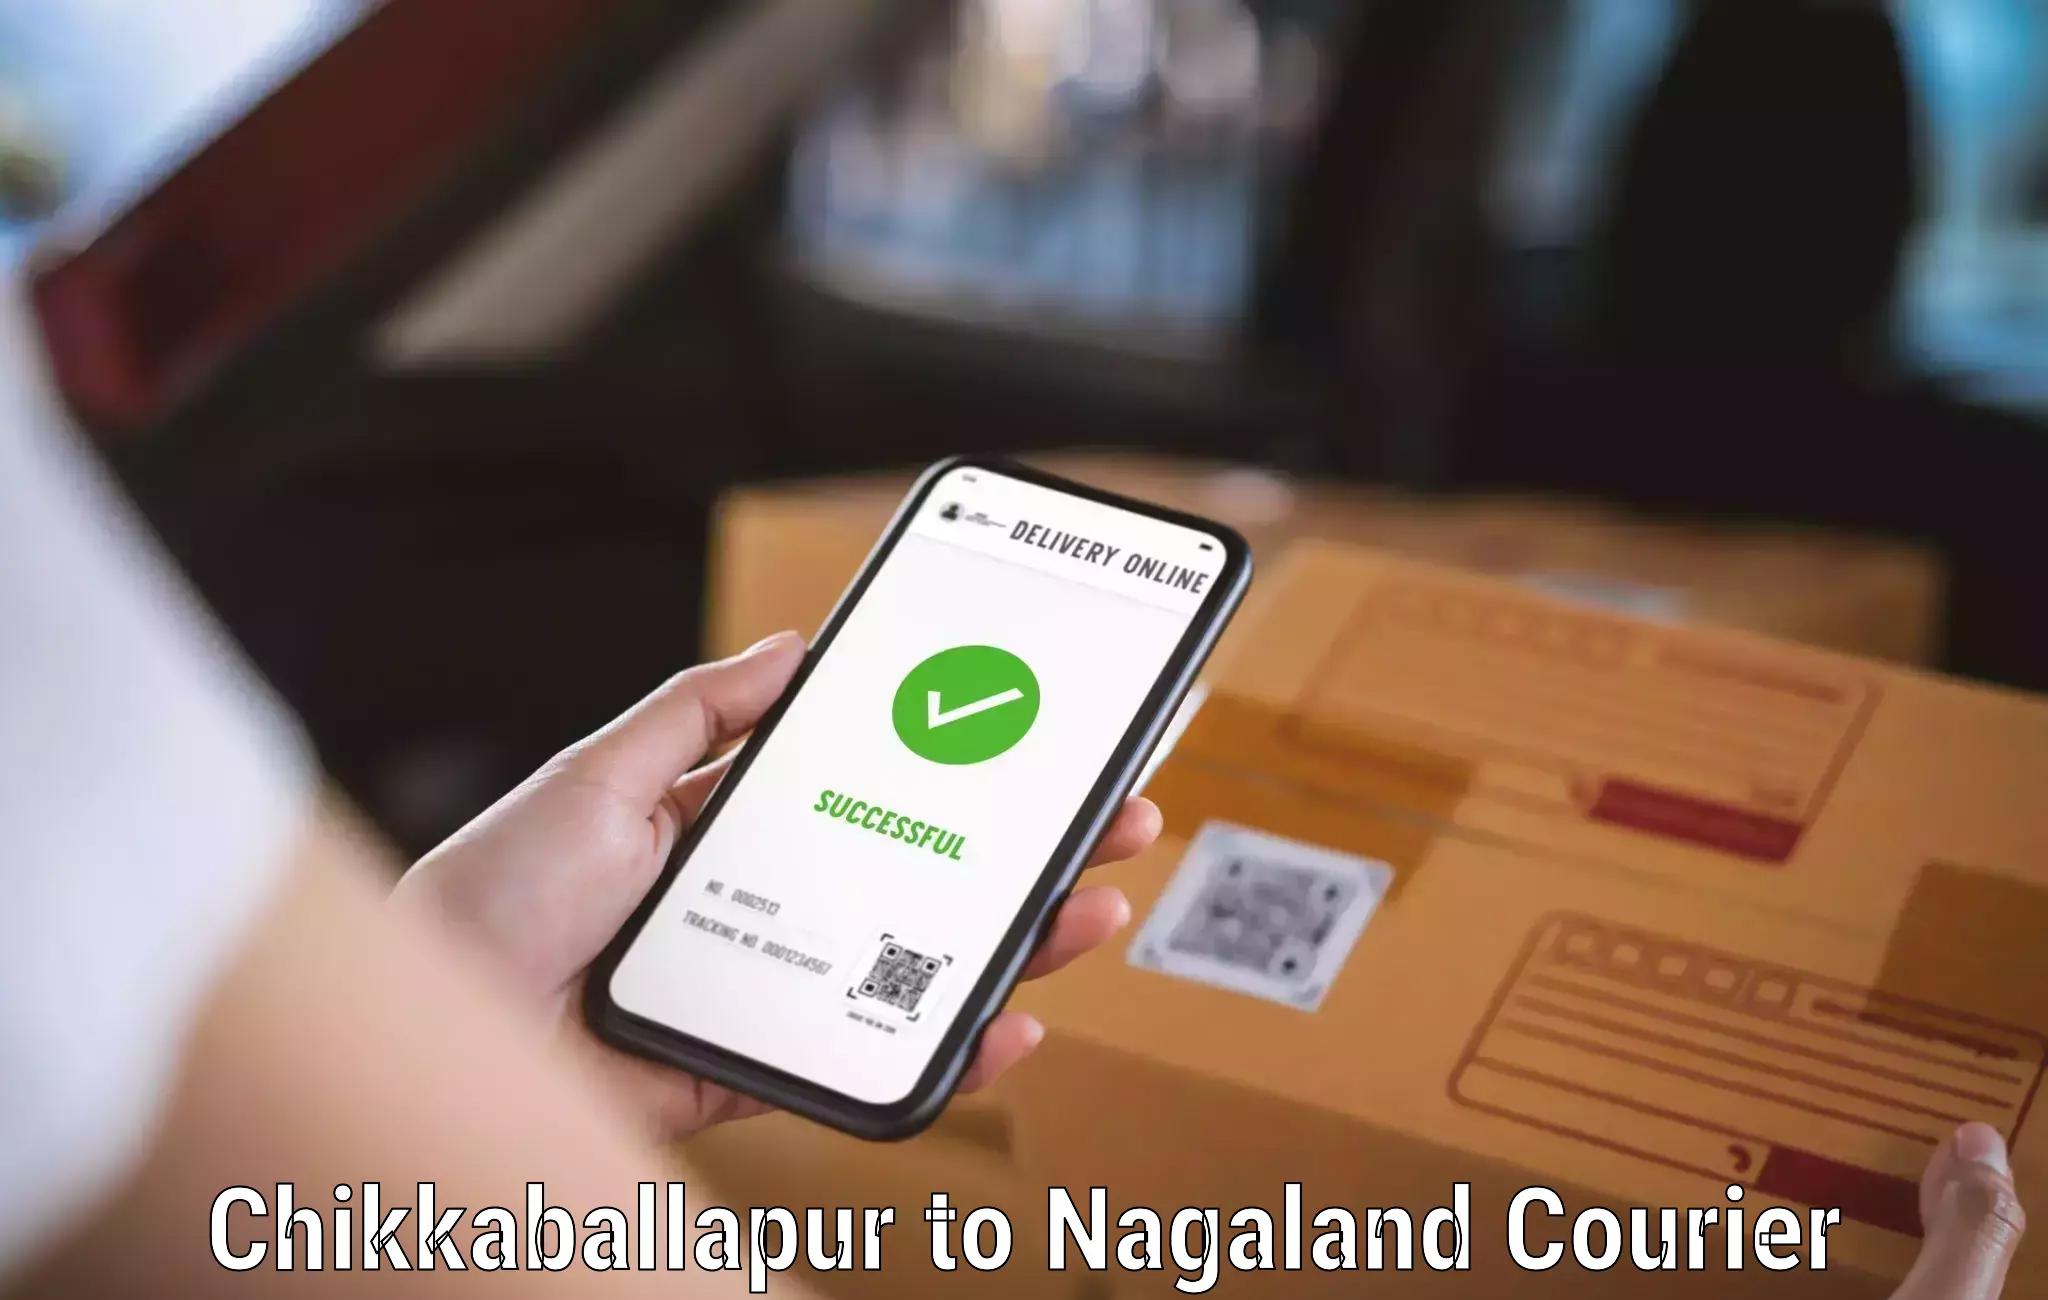 Advanced delivery network Chikkaballapur to Nagaland